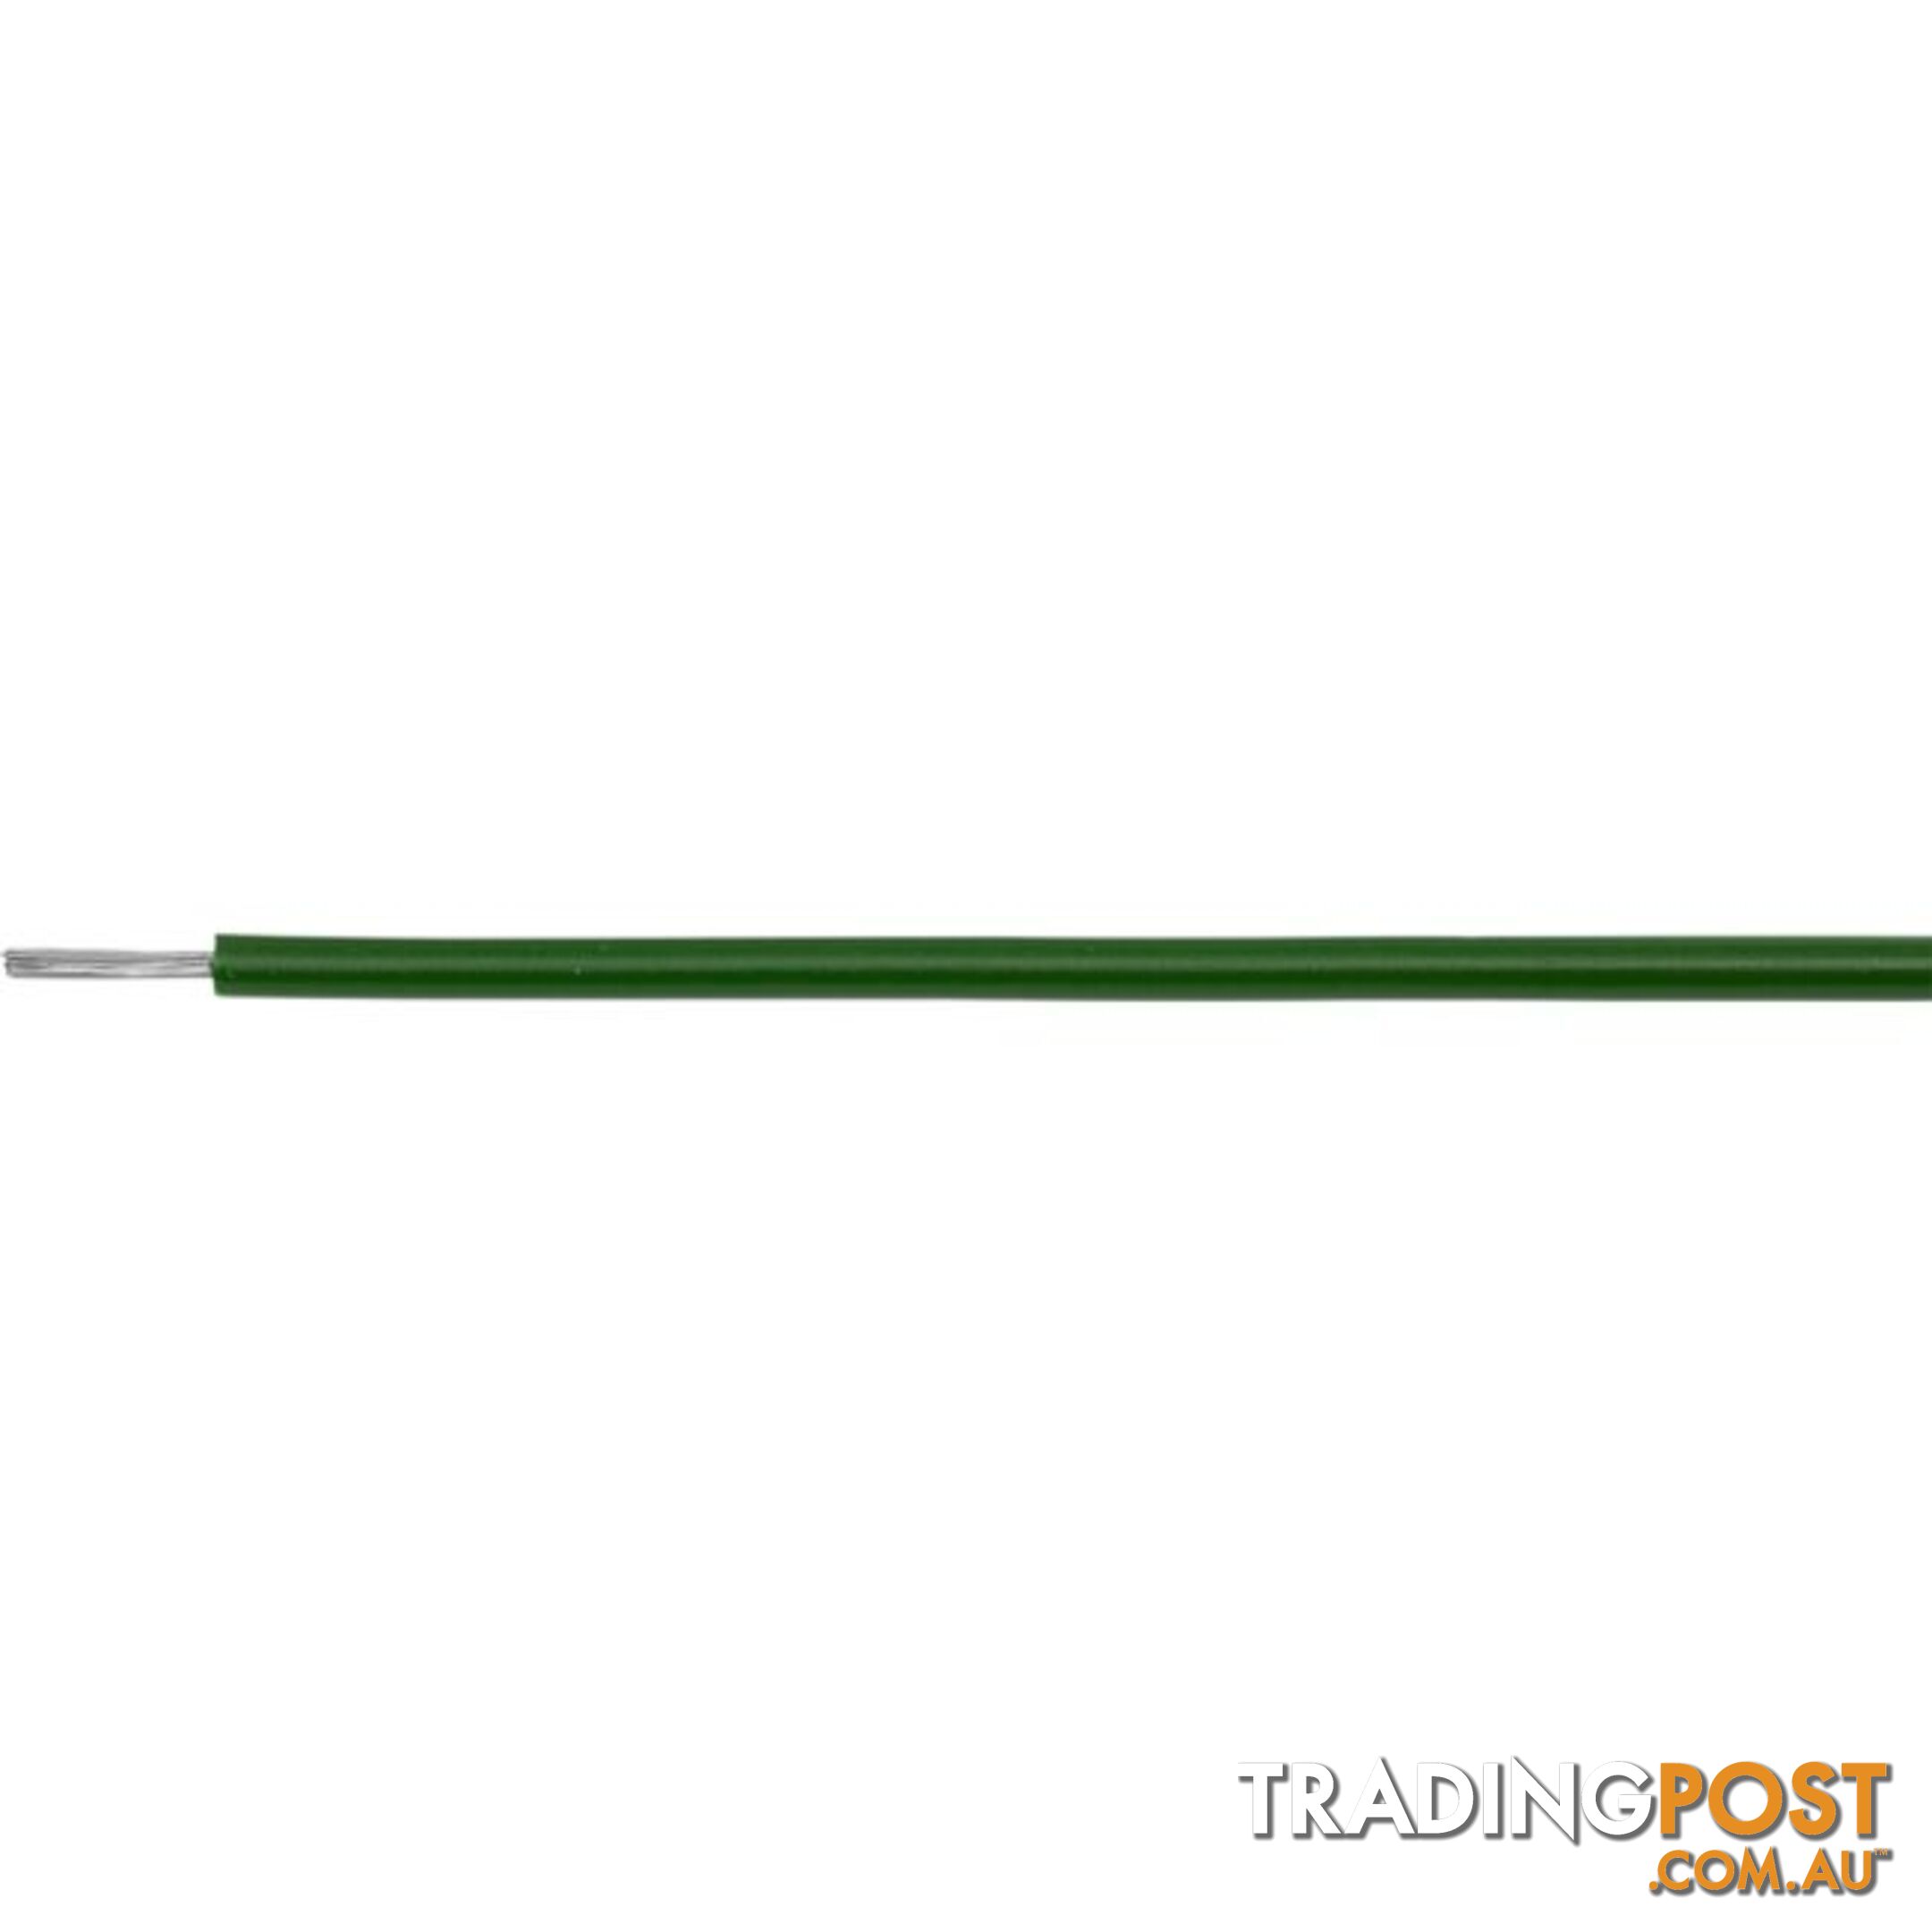 24-.2G-1M GREEN HOOKUP WIRE/ CABLE-1M 7A - PER METRE